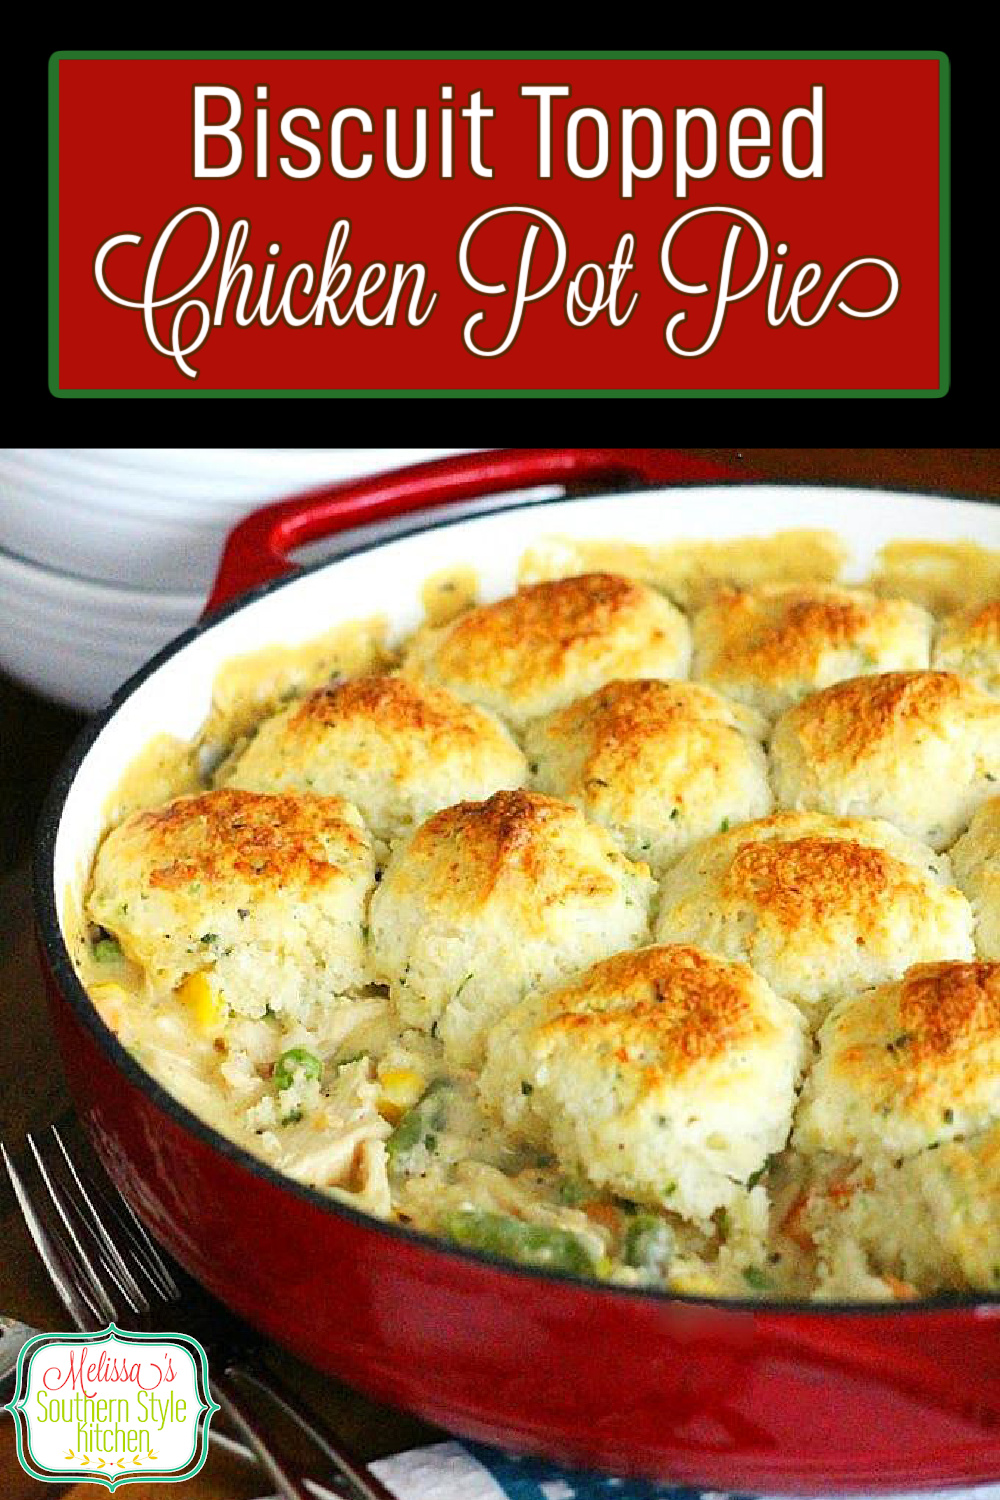 Biscuit Topped Chicken Pot Pie is a tummy filling meal that won't break the bank #chickenpotpie #southernbiscuits #biscuit #dinnerideas #easychickenrecipes #casseroles #southernfood #southernrecipes #potpie #dinner #dinnerideas #chickenrecipes #easyrecipes #southernbiscuits via @melissasssk